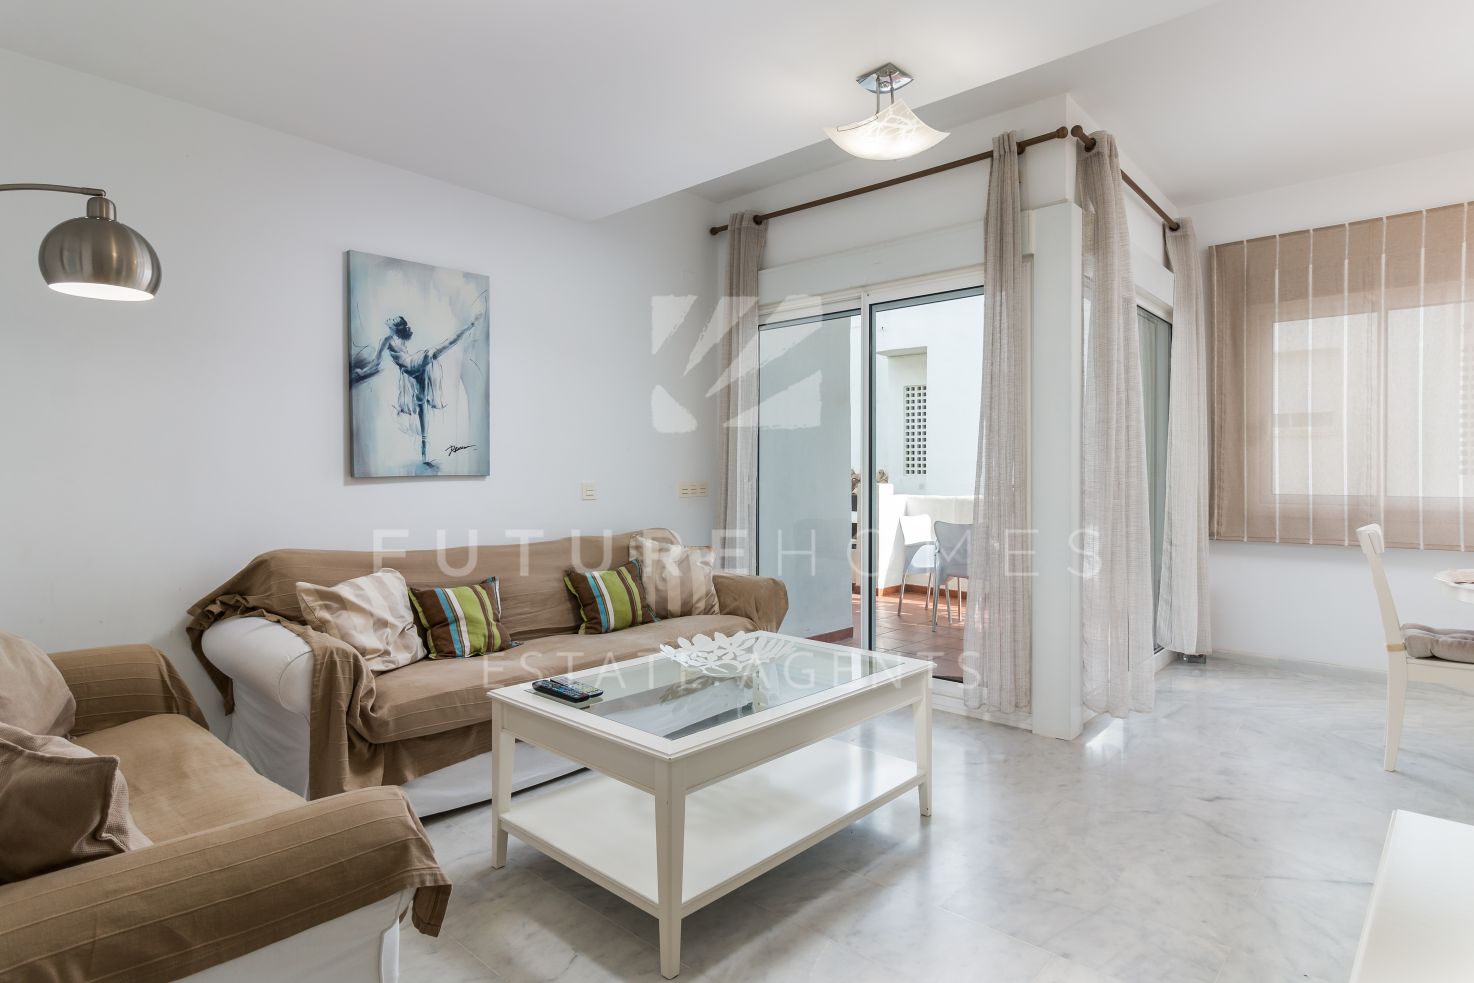 Modern 3 bedroom apartment only 10 minutes from Estepona port.